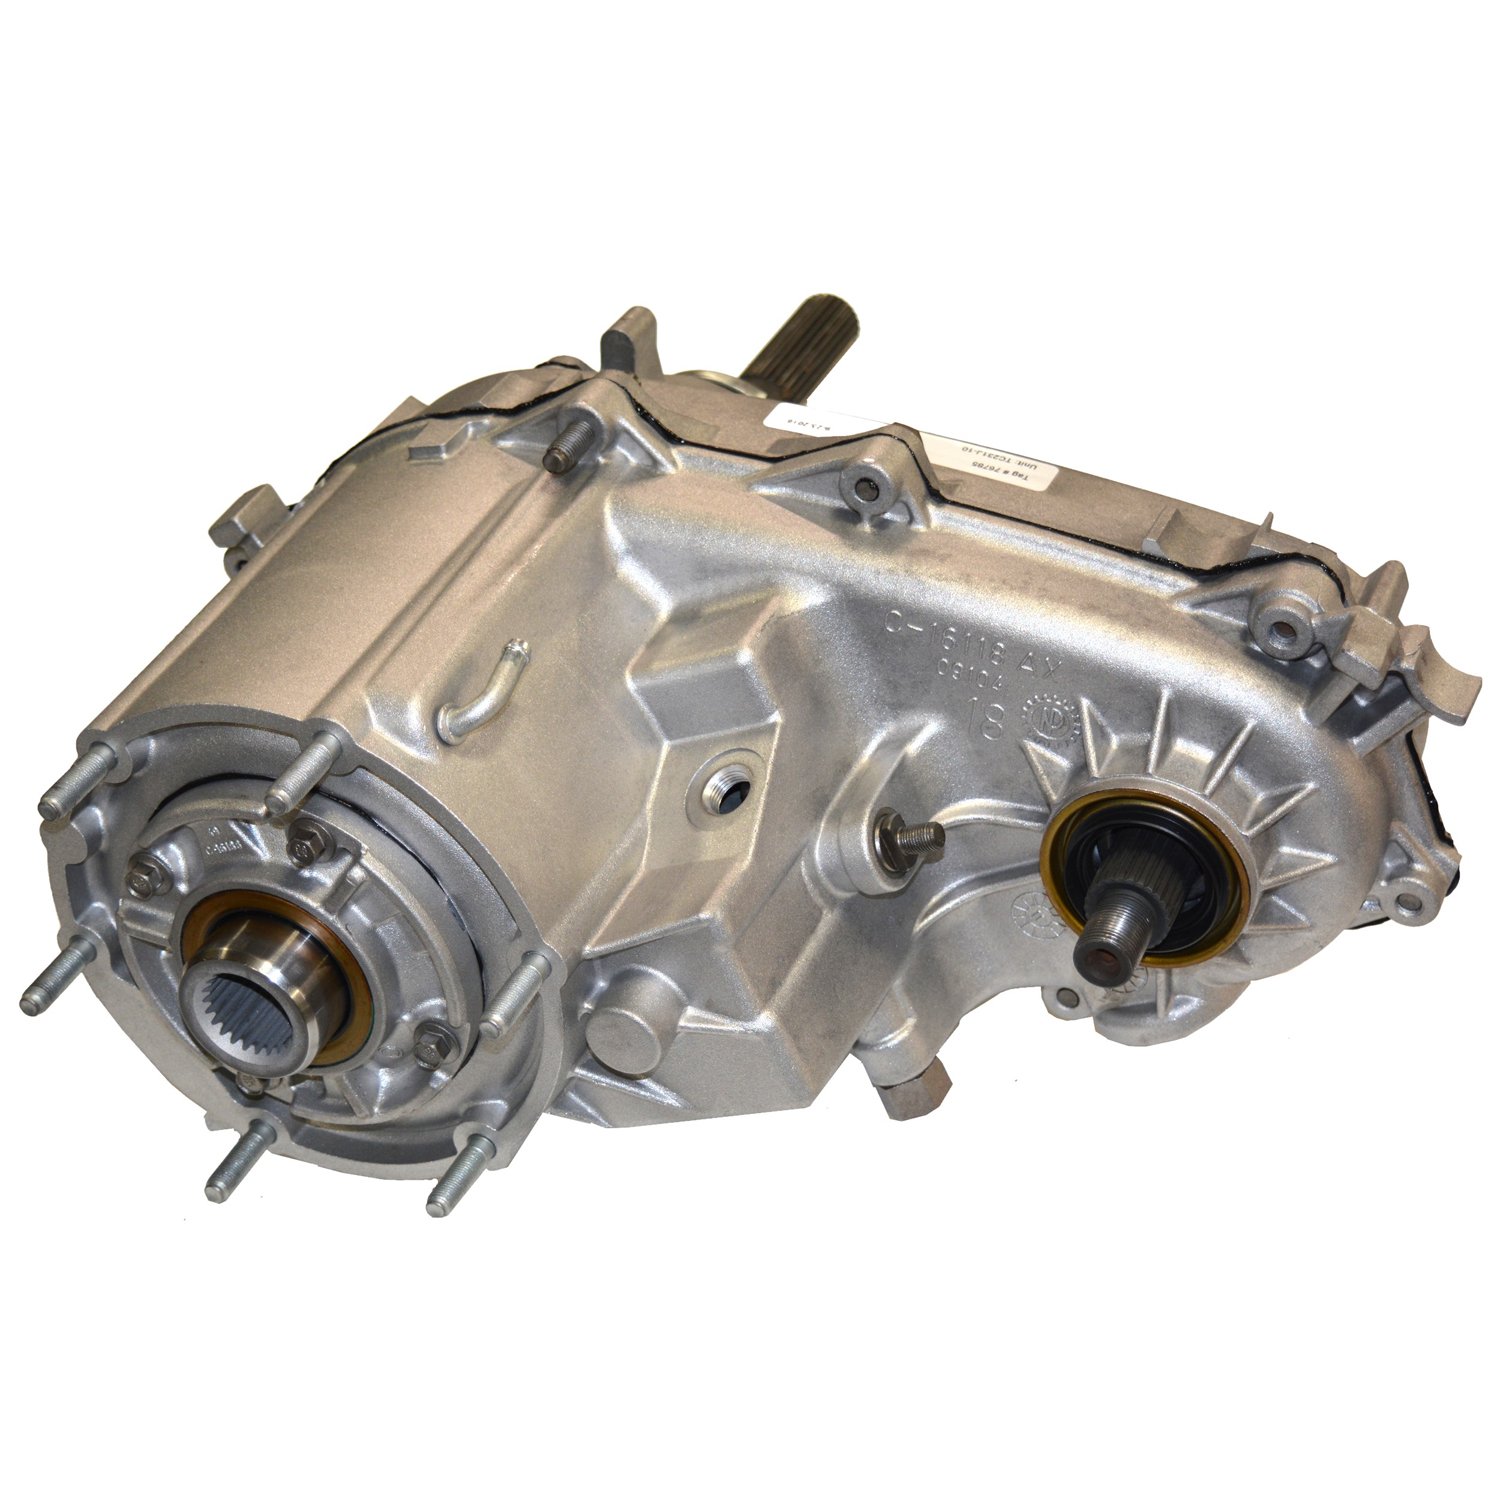 Remanufactured NP231 Transfer Case for Jeep 97-02 Wrangler